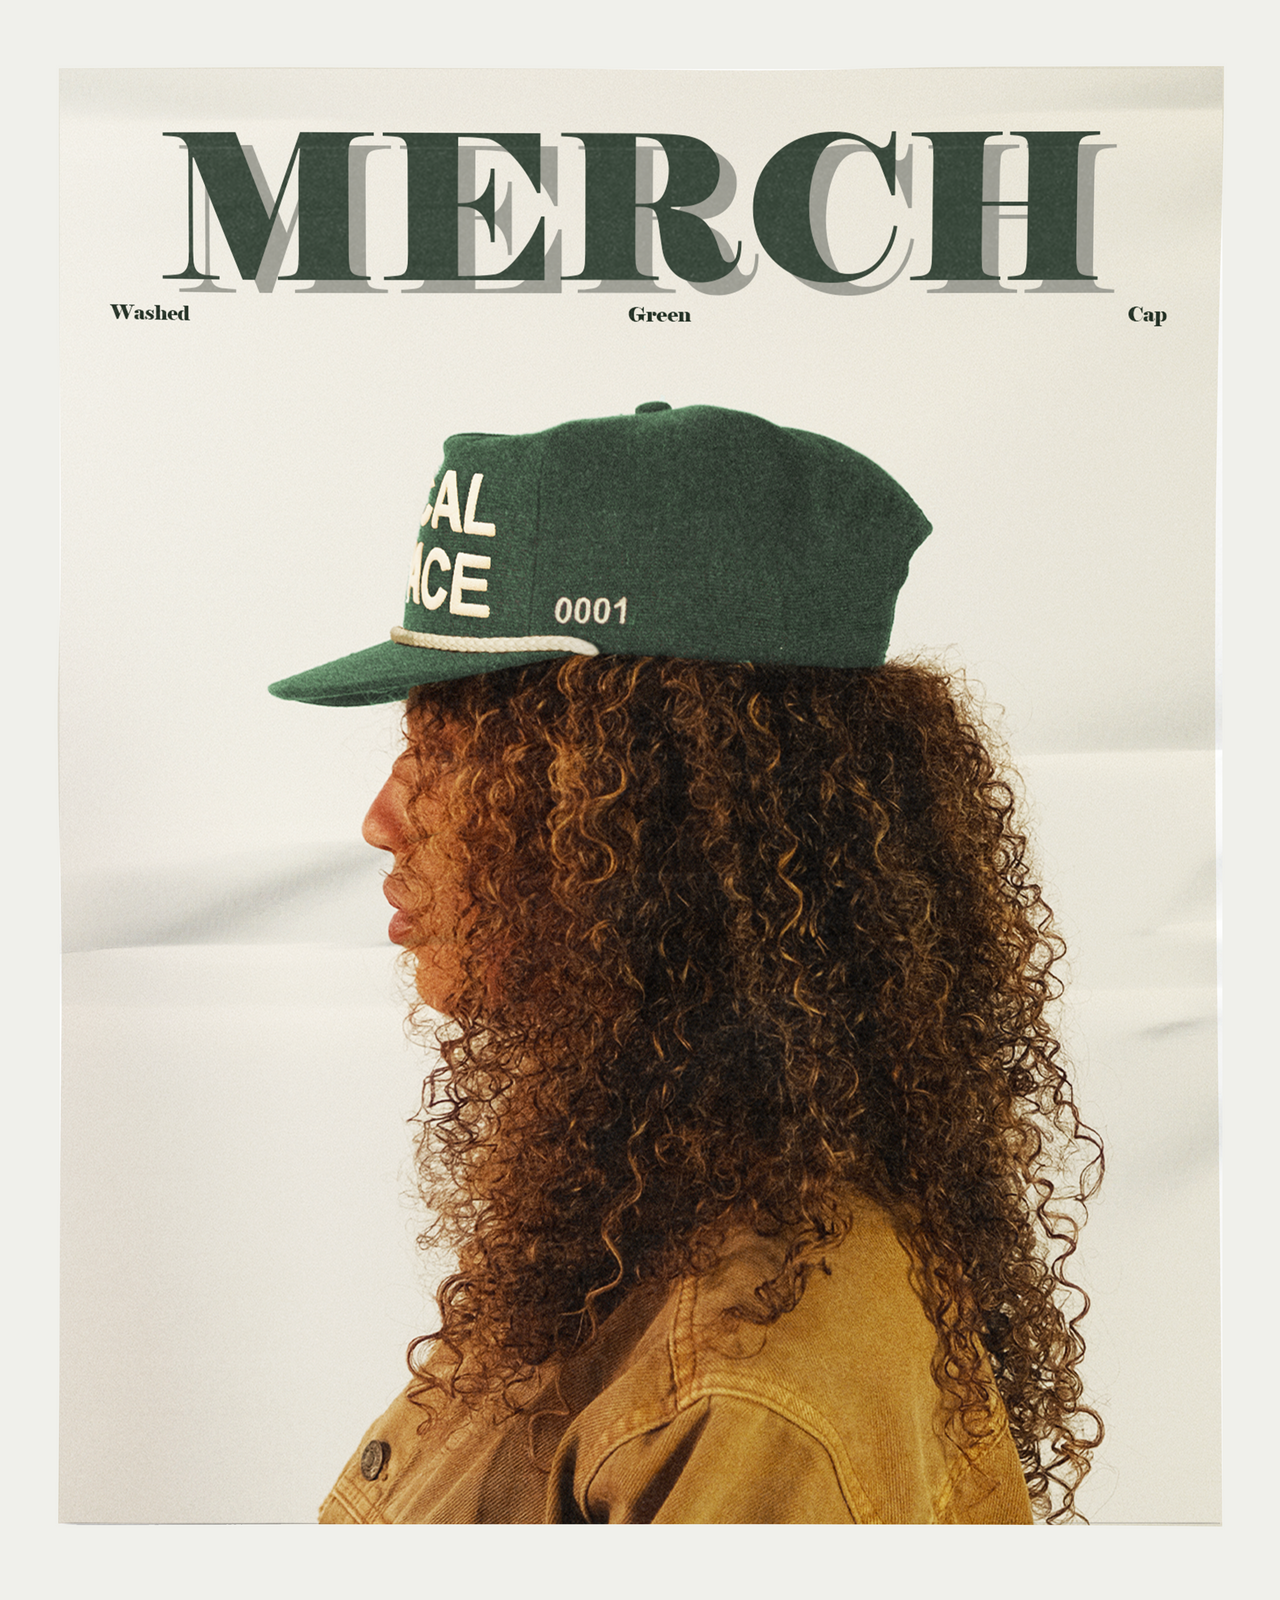 Washed Green Merch Cap featuring 'LOCAL SPACE' in puff print on the front, 'ISSUE 0001' embroidery on the side, vintage snapback fit, and a slightly curved brim, made from 100% cotton canvas.